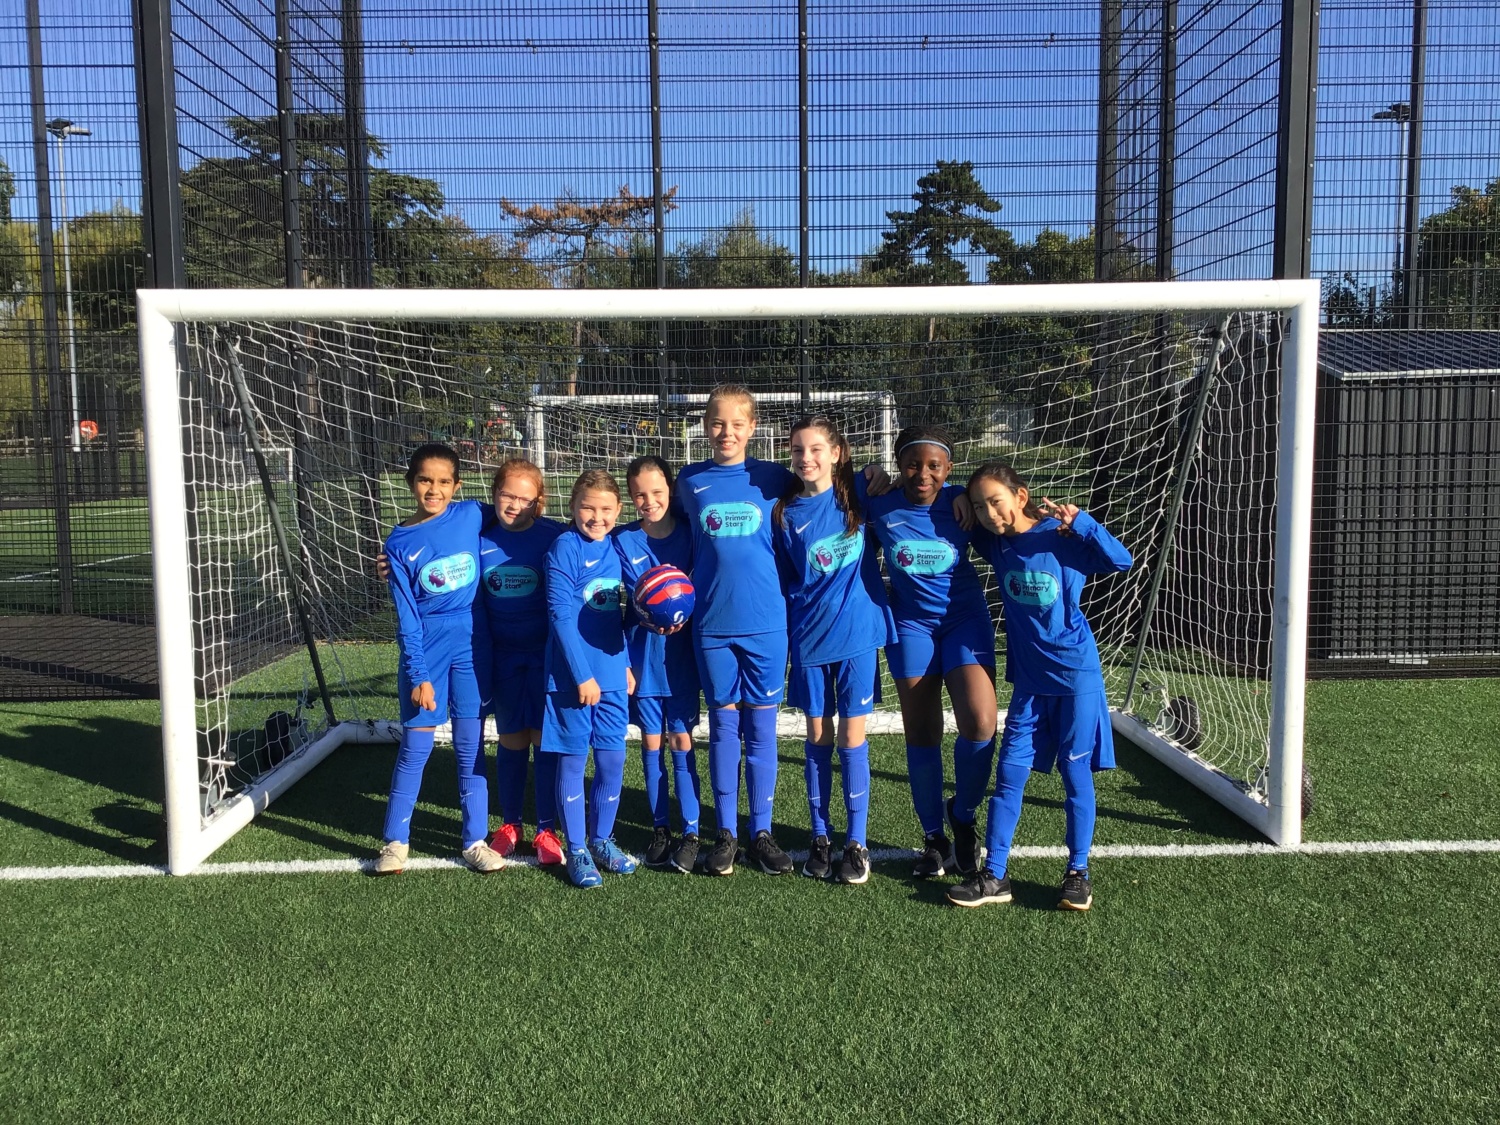 A team of 8 students in a blue kit, posing for a photo in front of a football goal